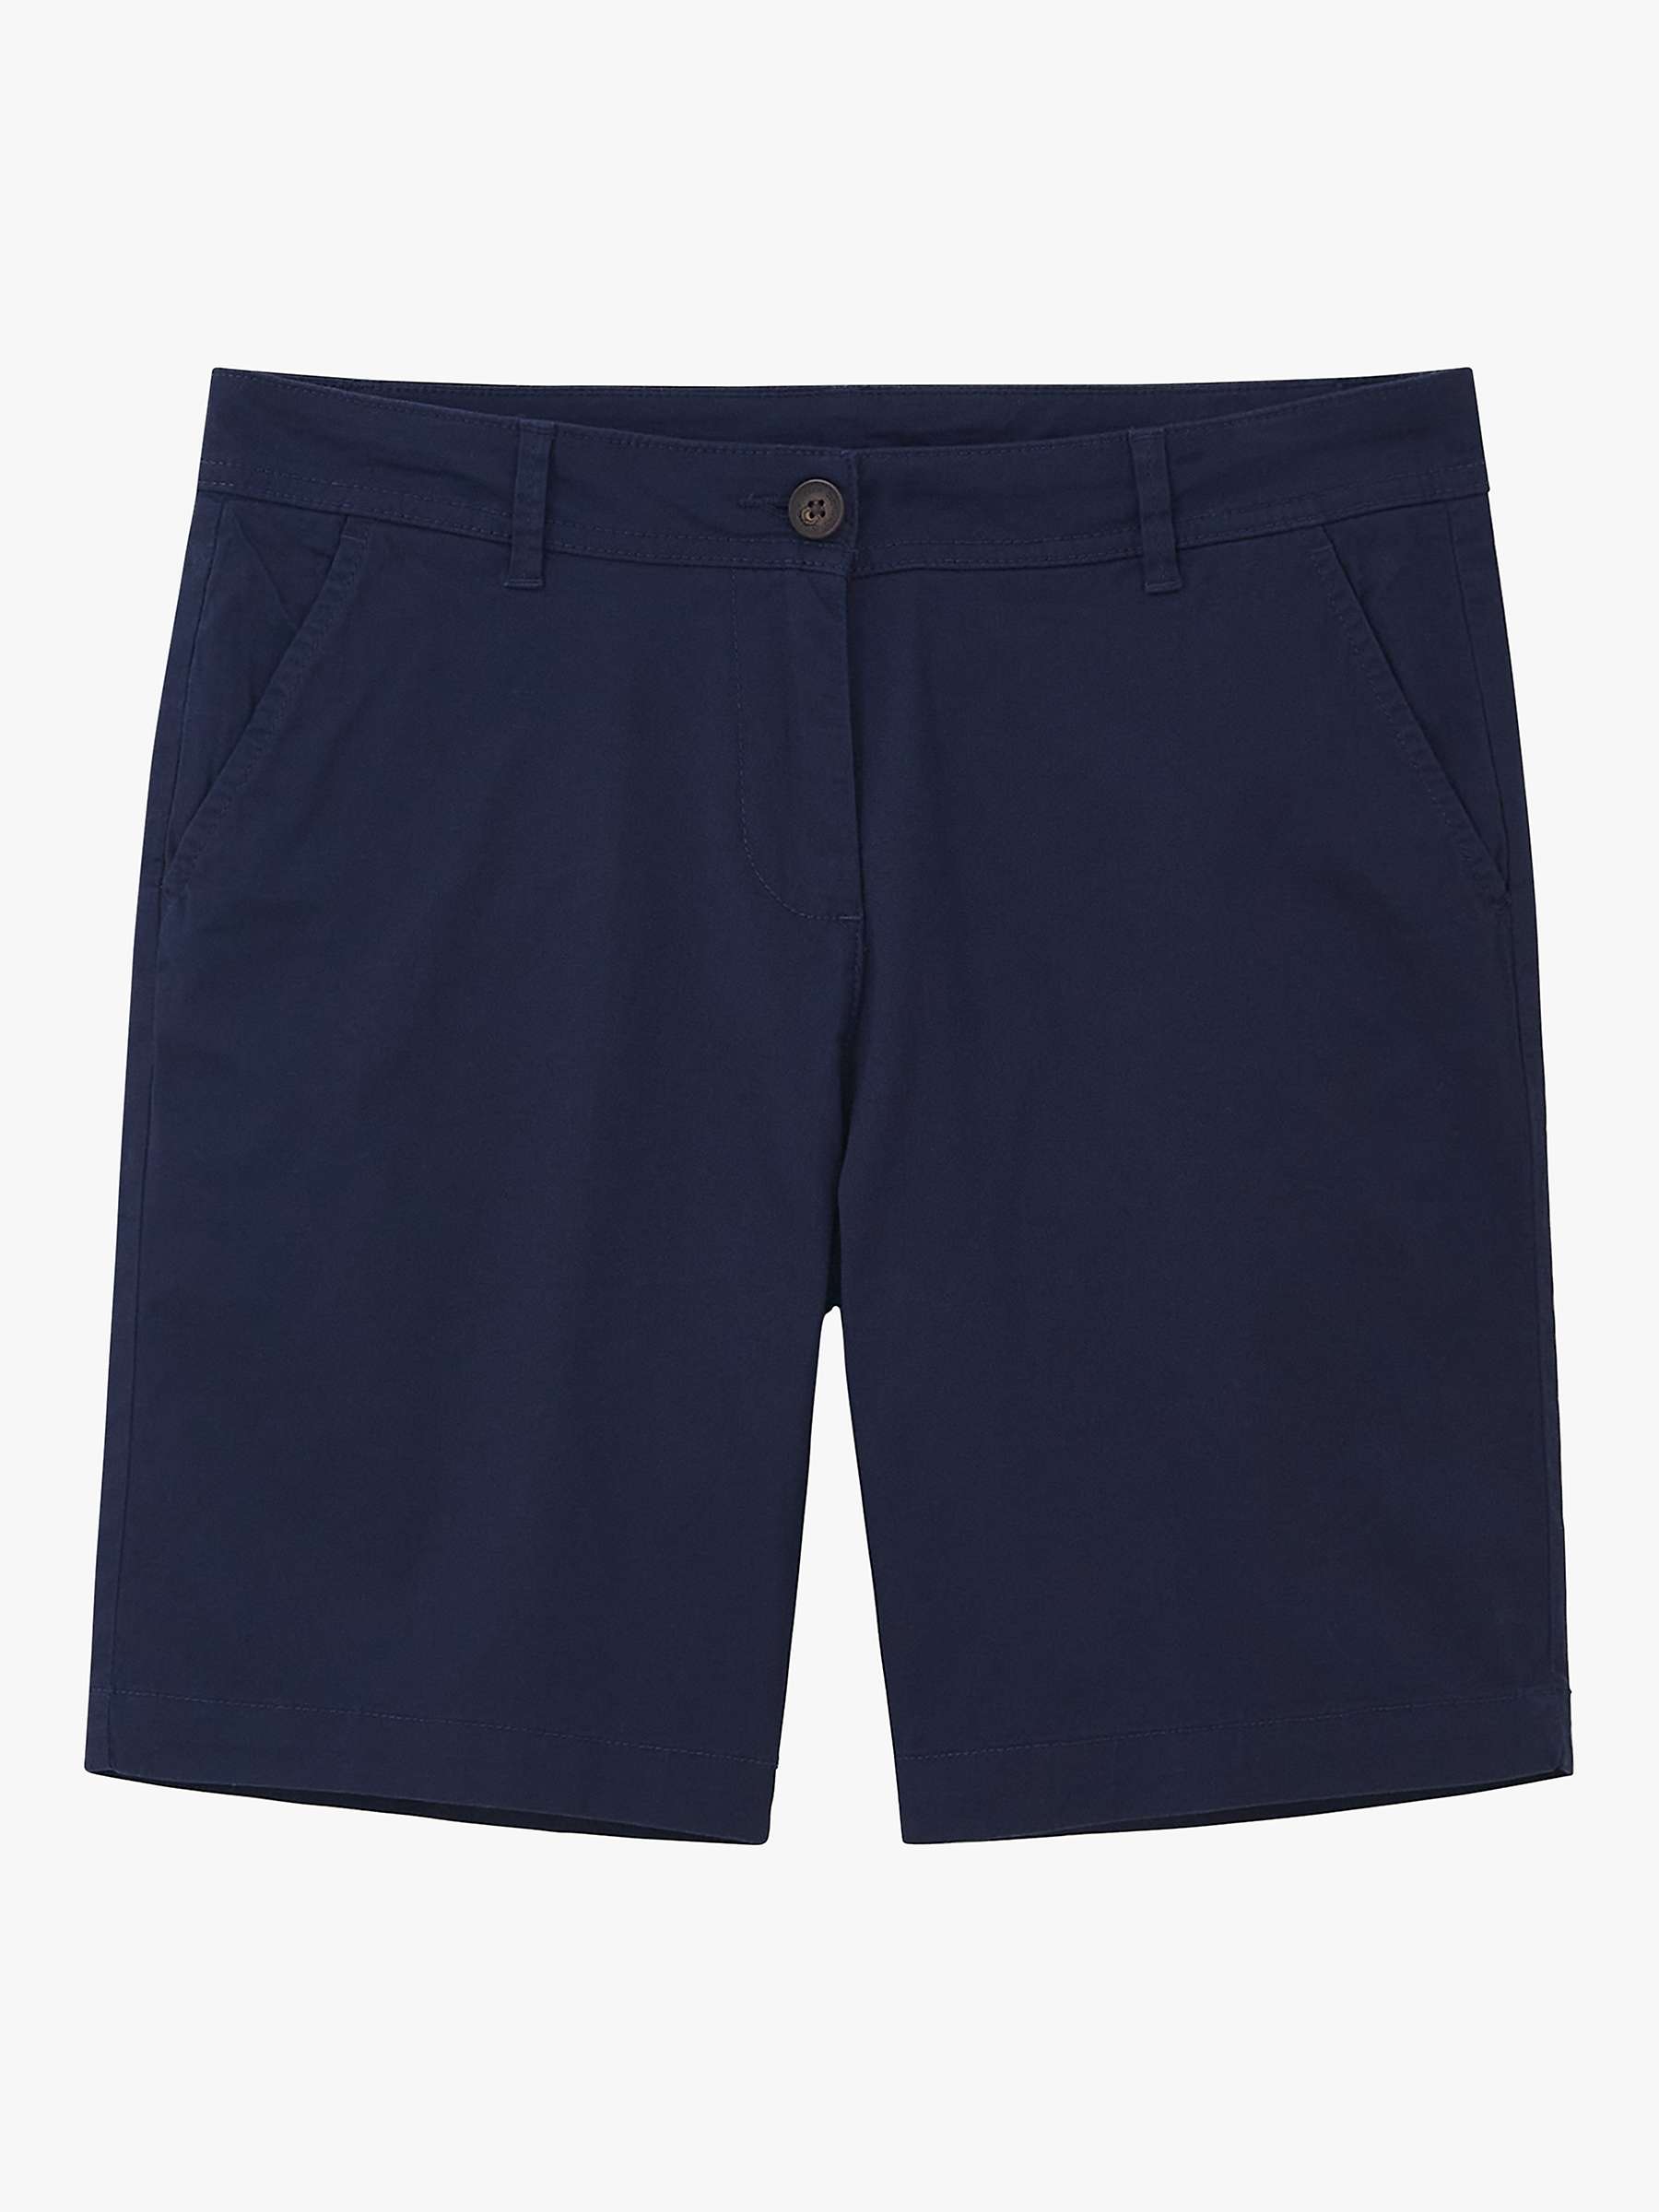 Buy Crew Clothing Chino Shorts Online at johnlewis.com